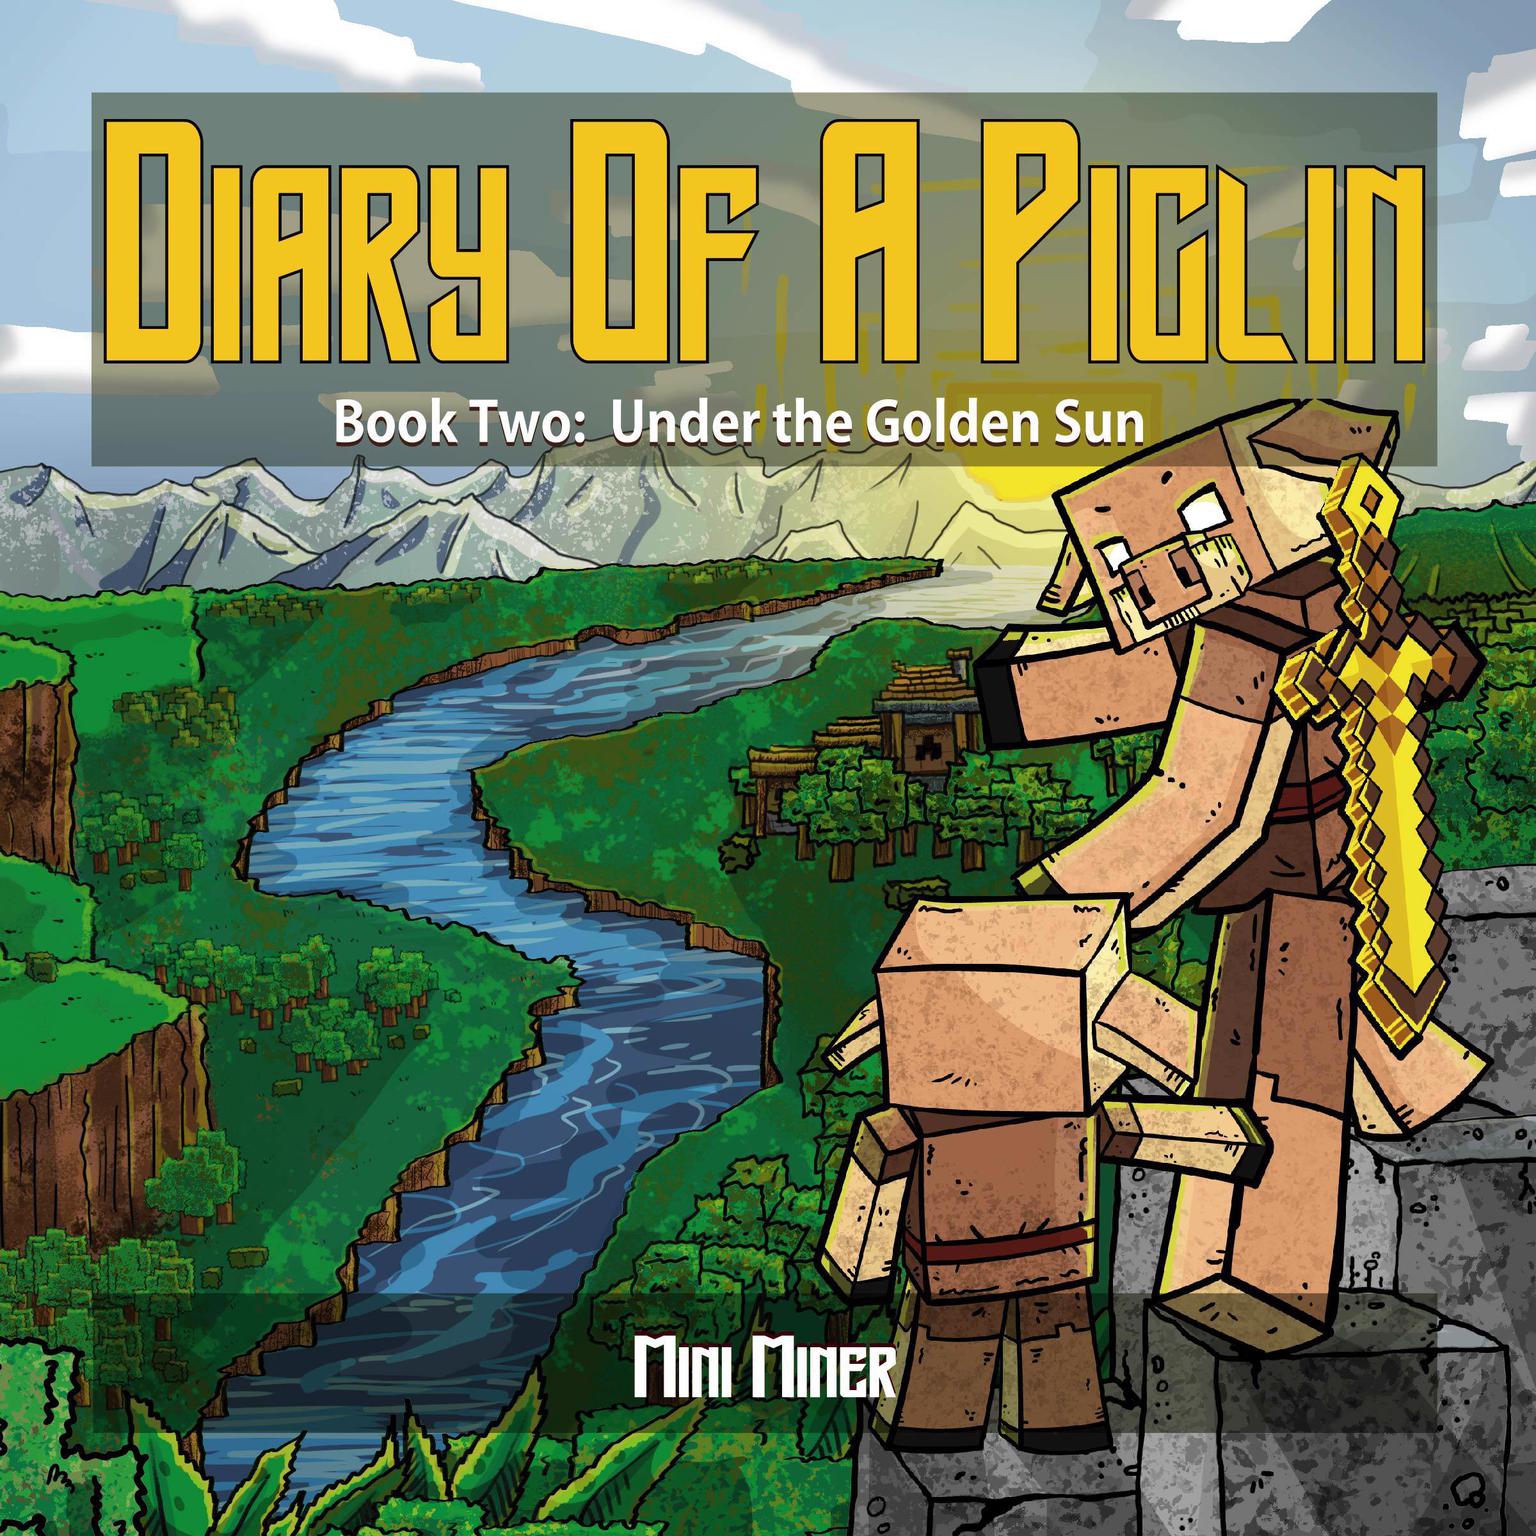 Diary of A Piglin Book 2: Under the Golden Sun Audiobook, by Mini Miner